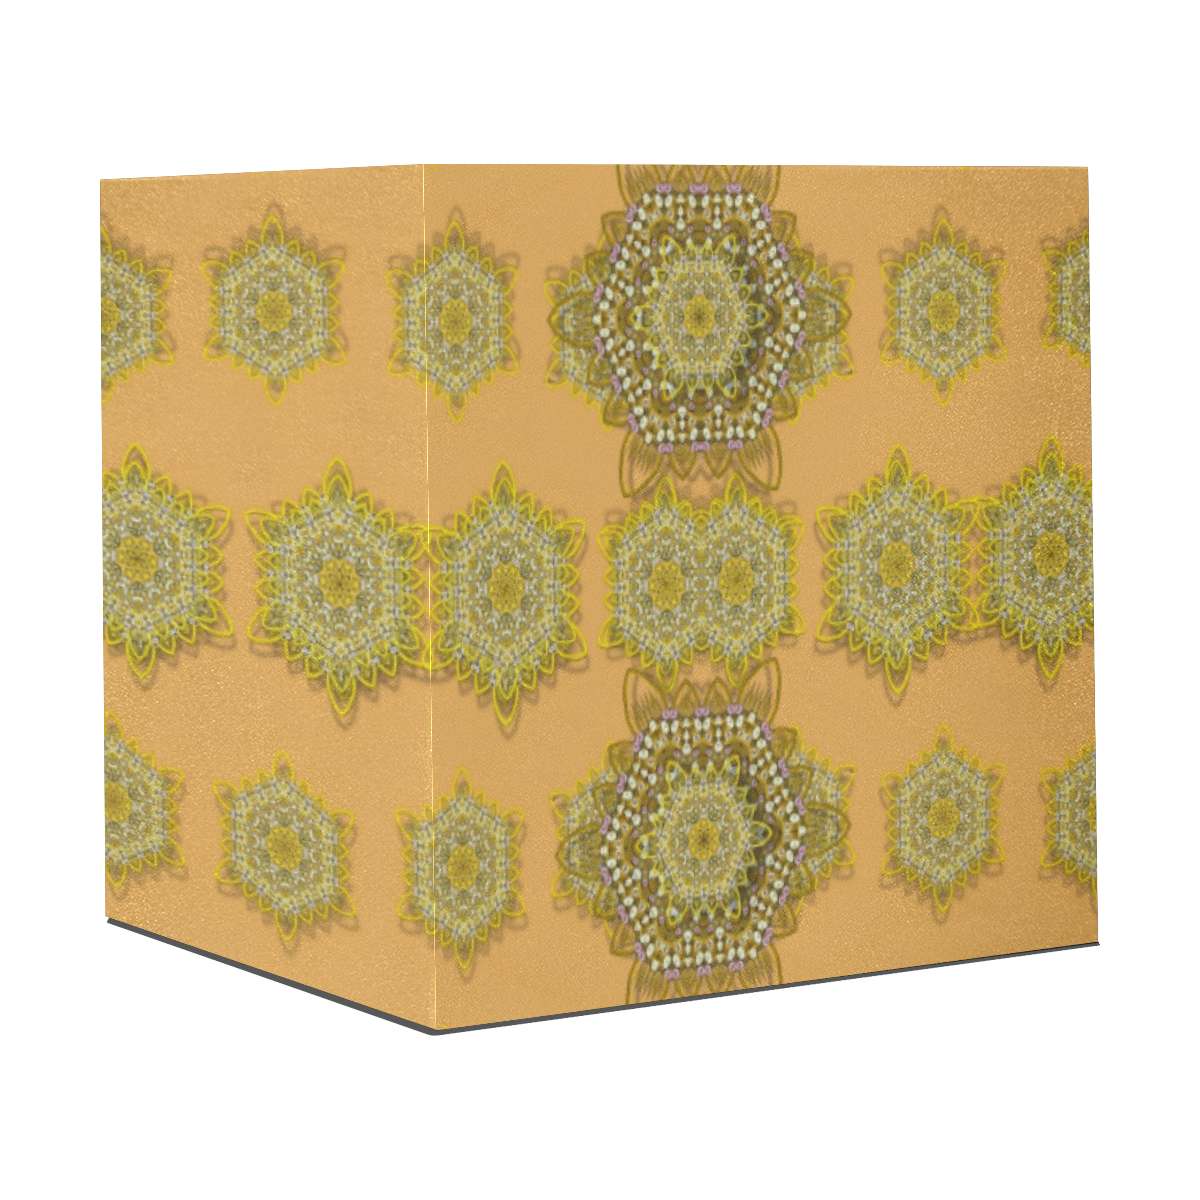 stars in the sky Gift Wrapping Paper 58"x 23" (3 Rolls)